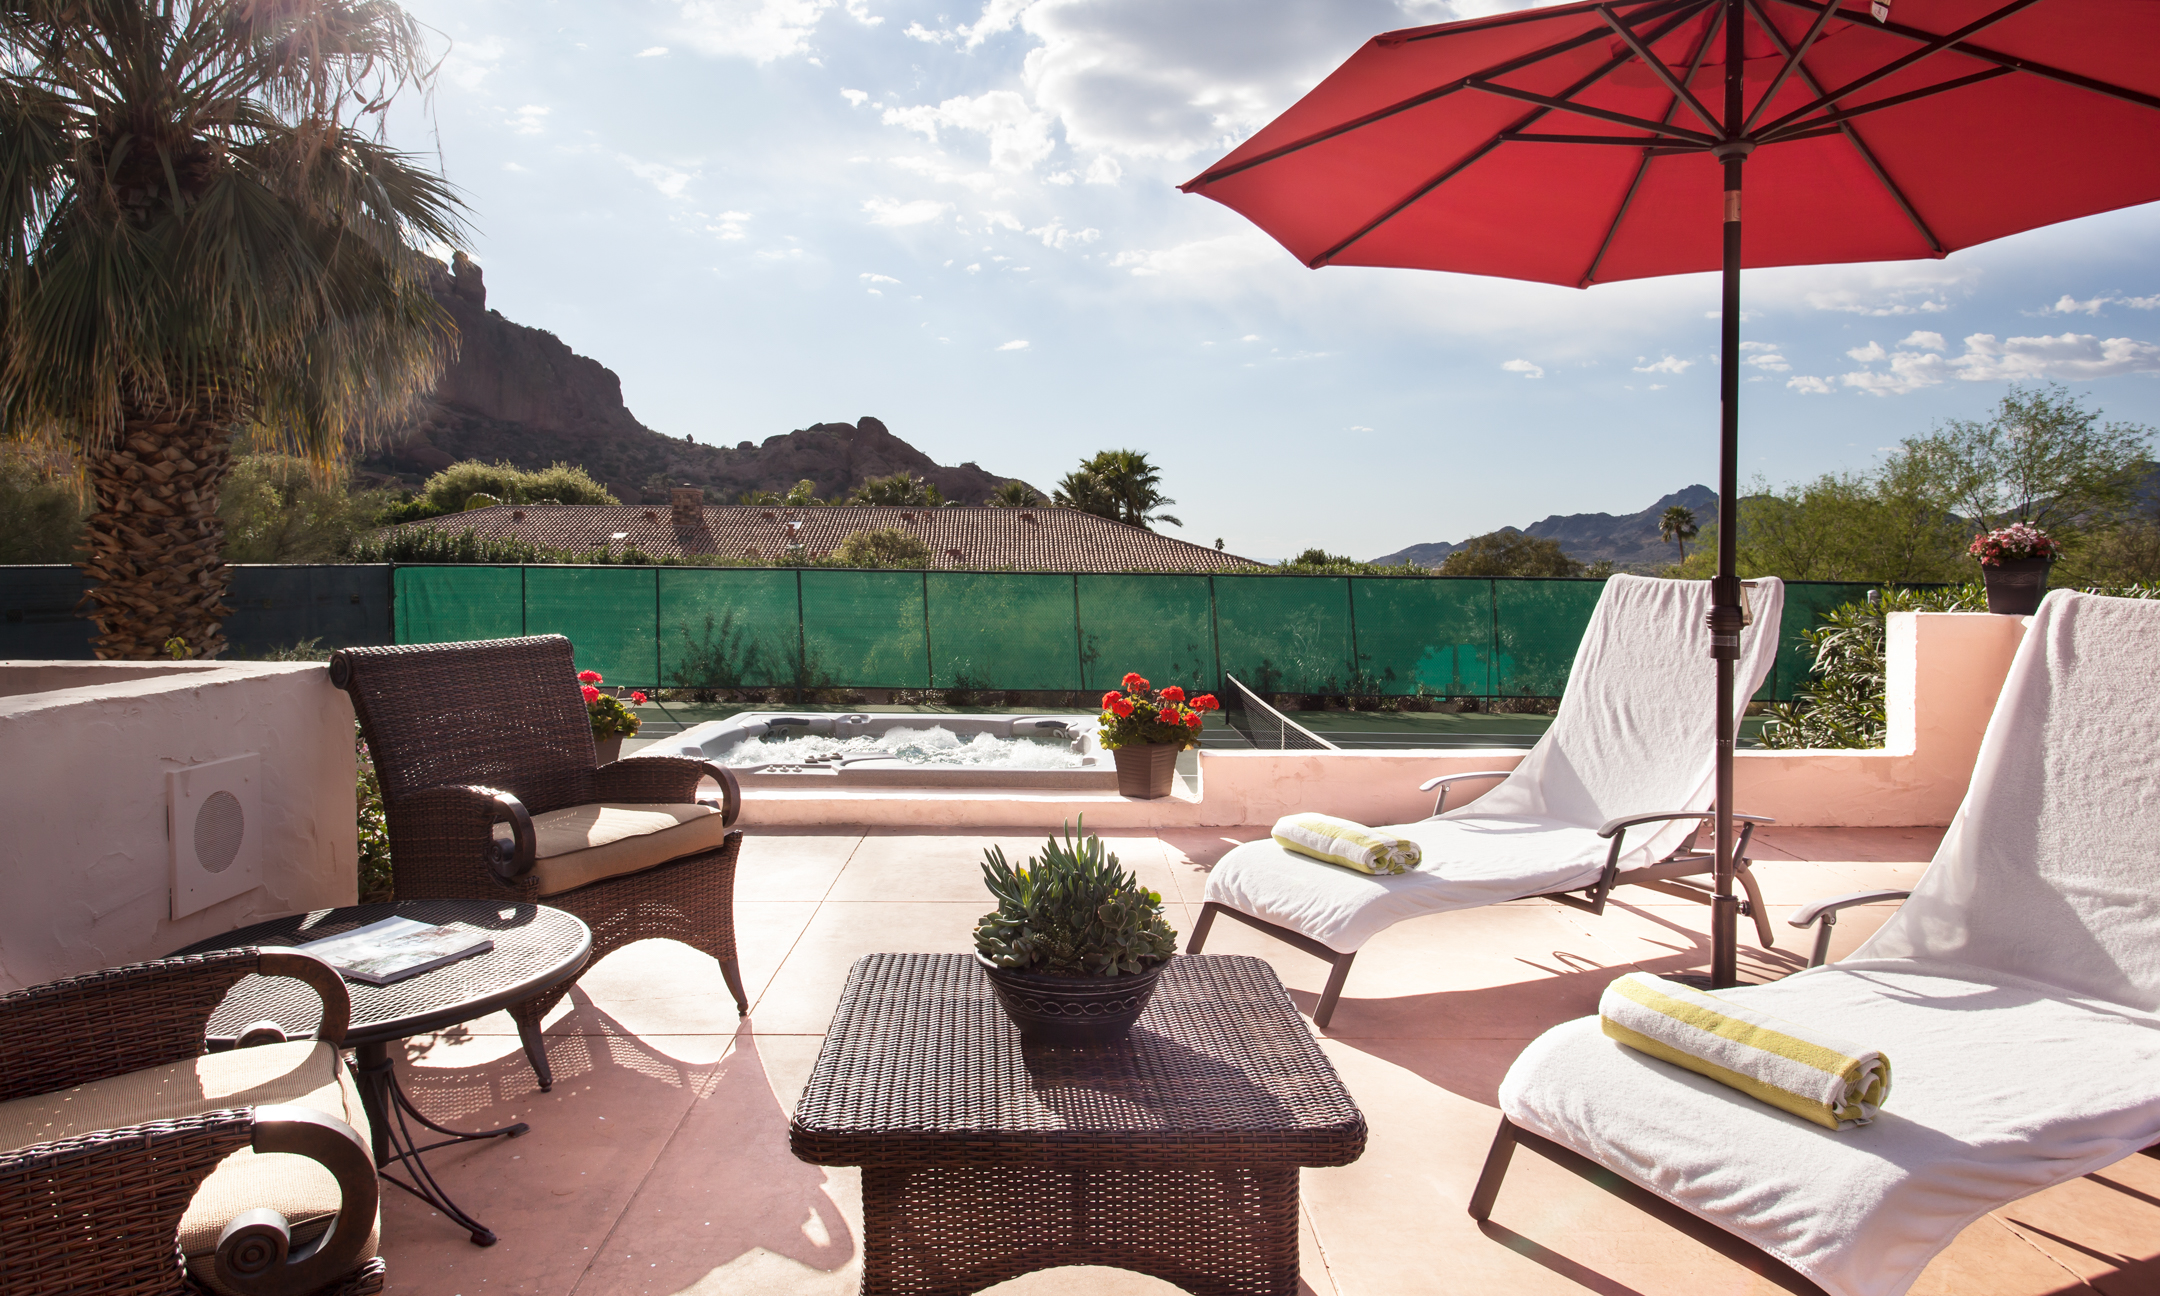 Villa Norte private patio with seating area, hot tub and view of Camelback Mountain.